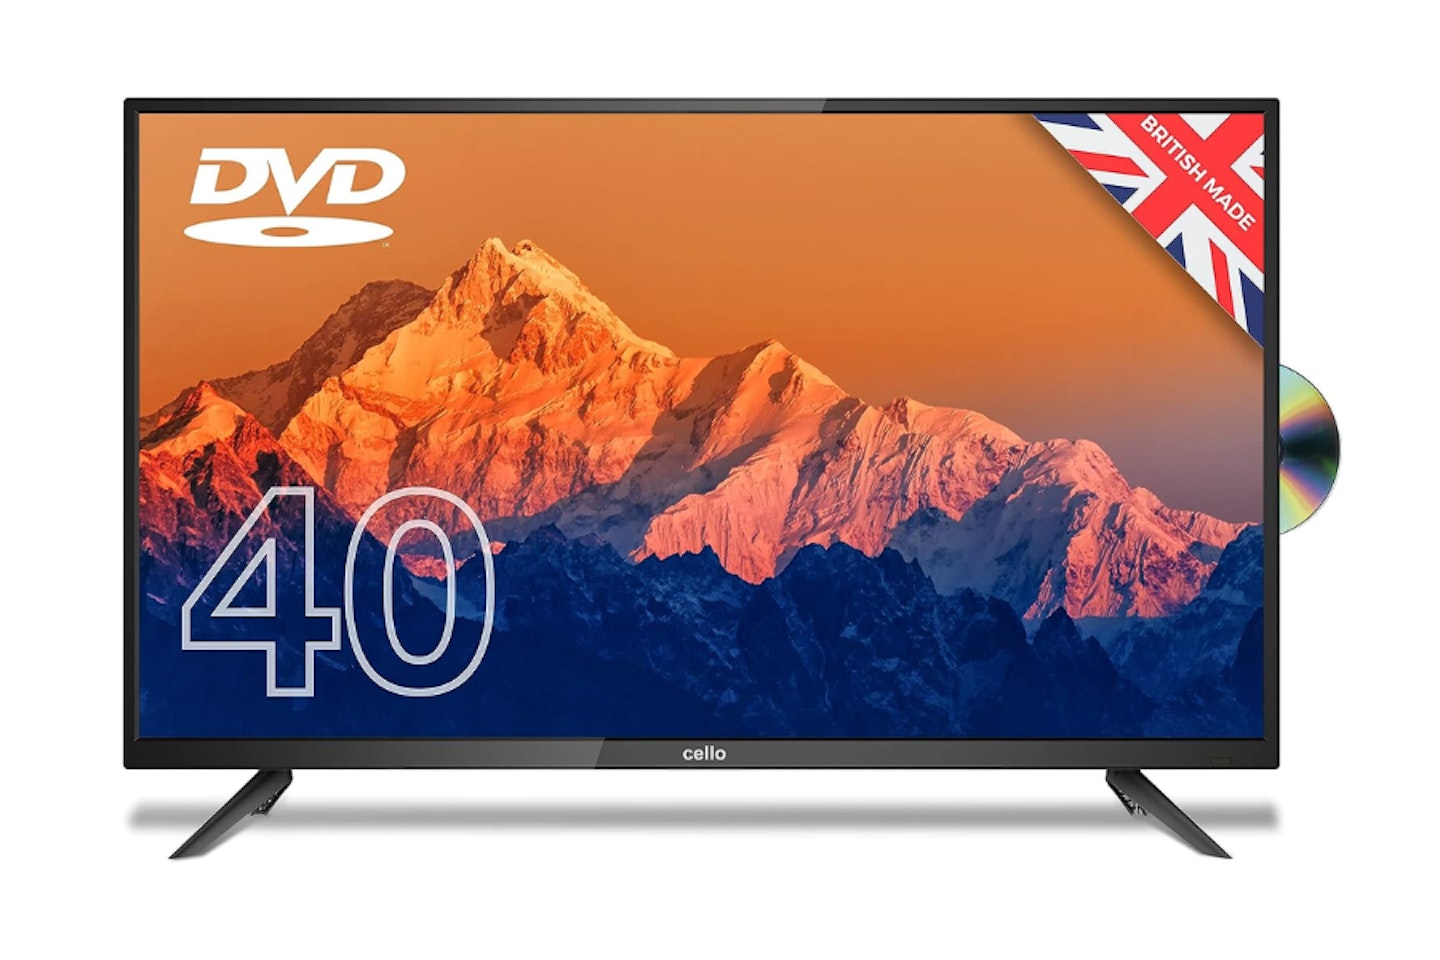 Cello Y22ZF0204 40 inch Full HD LED TV with Built-in DVD - one of the best 40" TVs